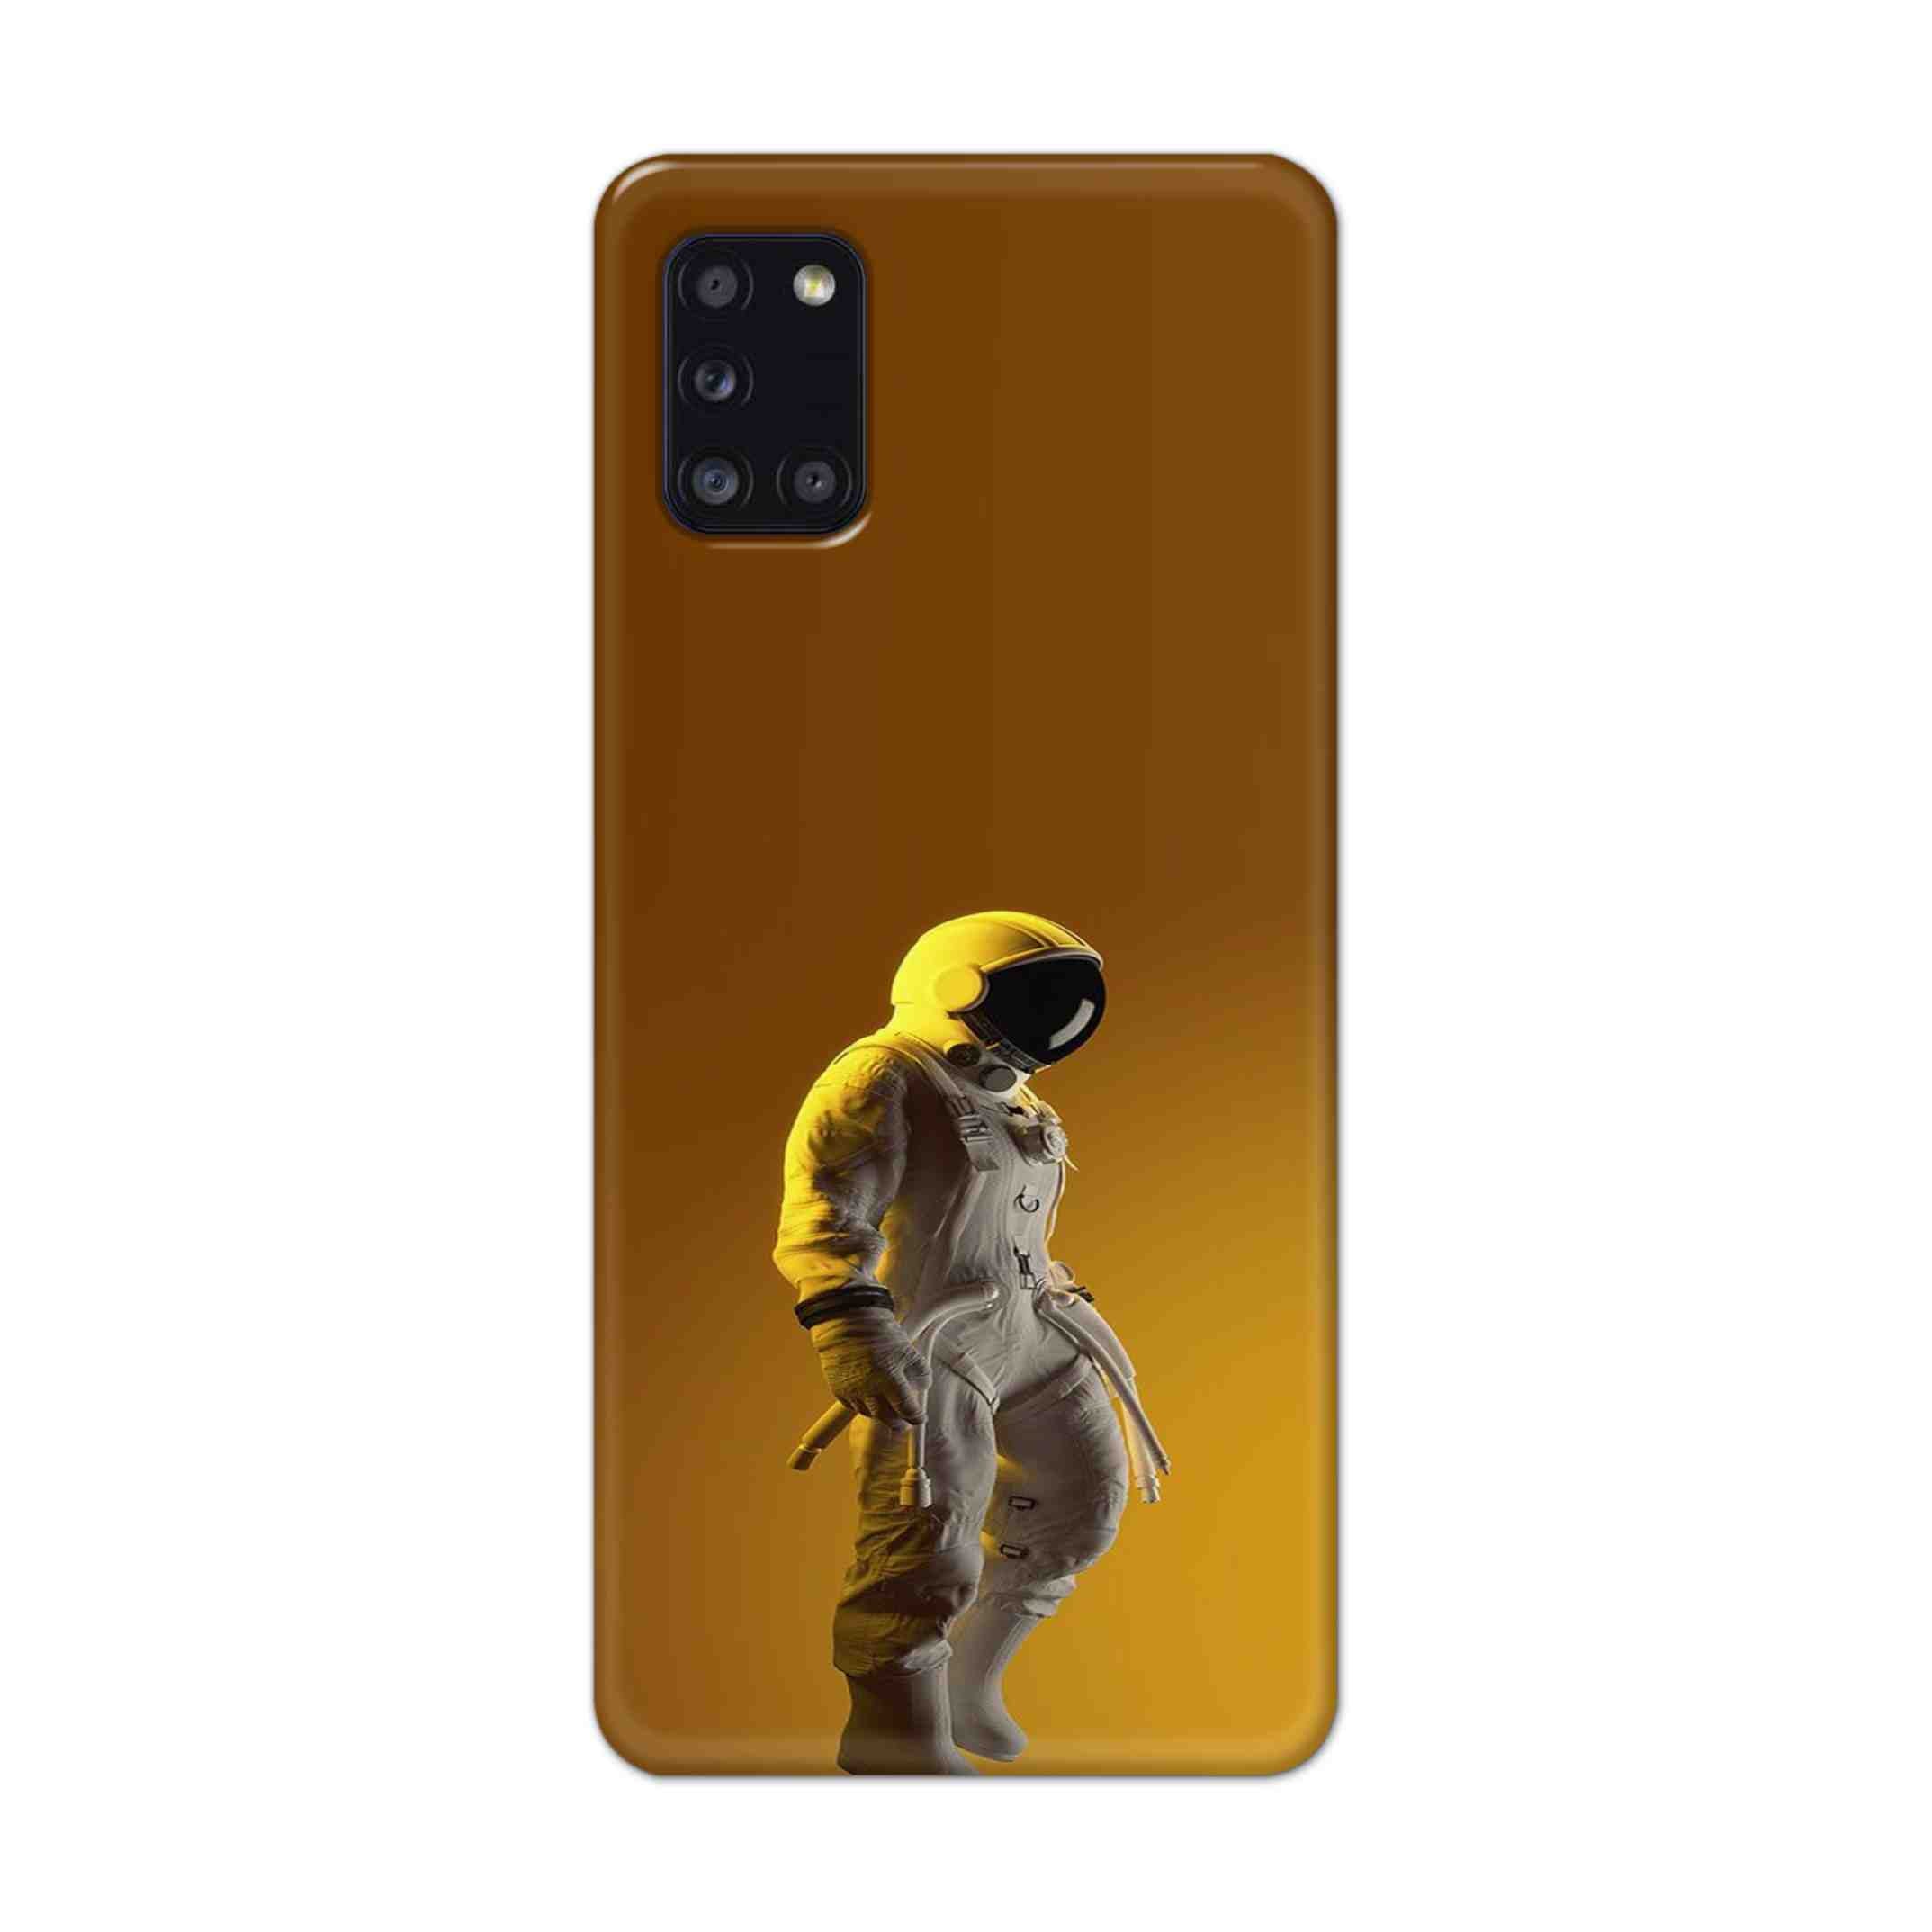 Buy Yellow Astronaut Hard Back Mobile Phone Case Cover For Samsung Galaxy A31 Online